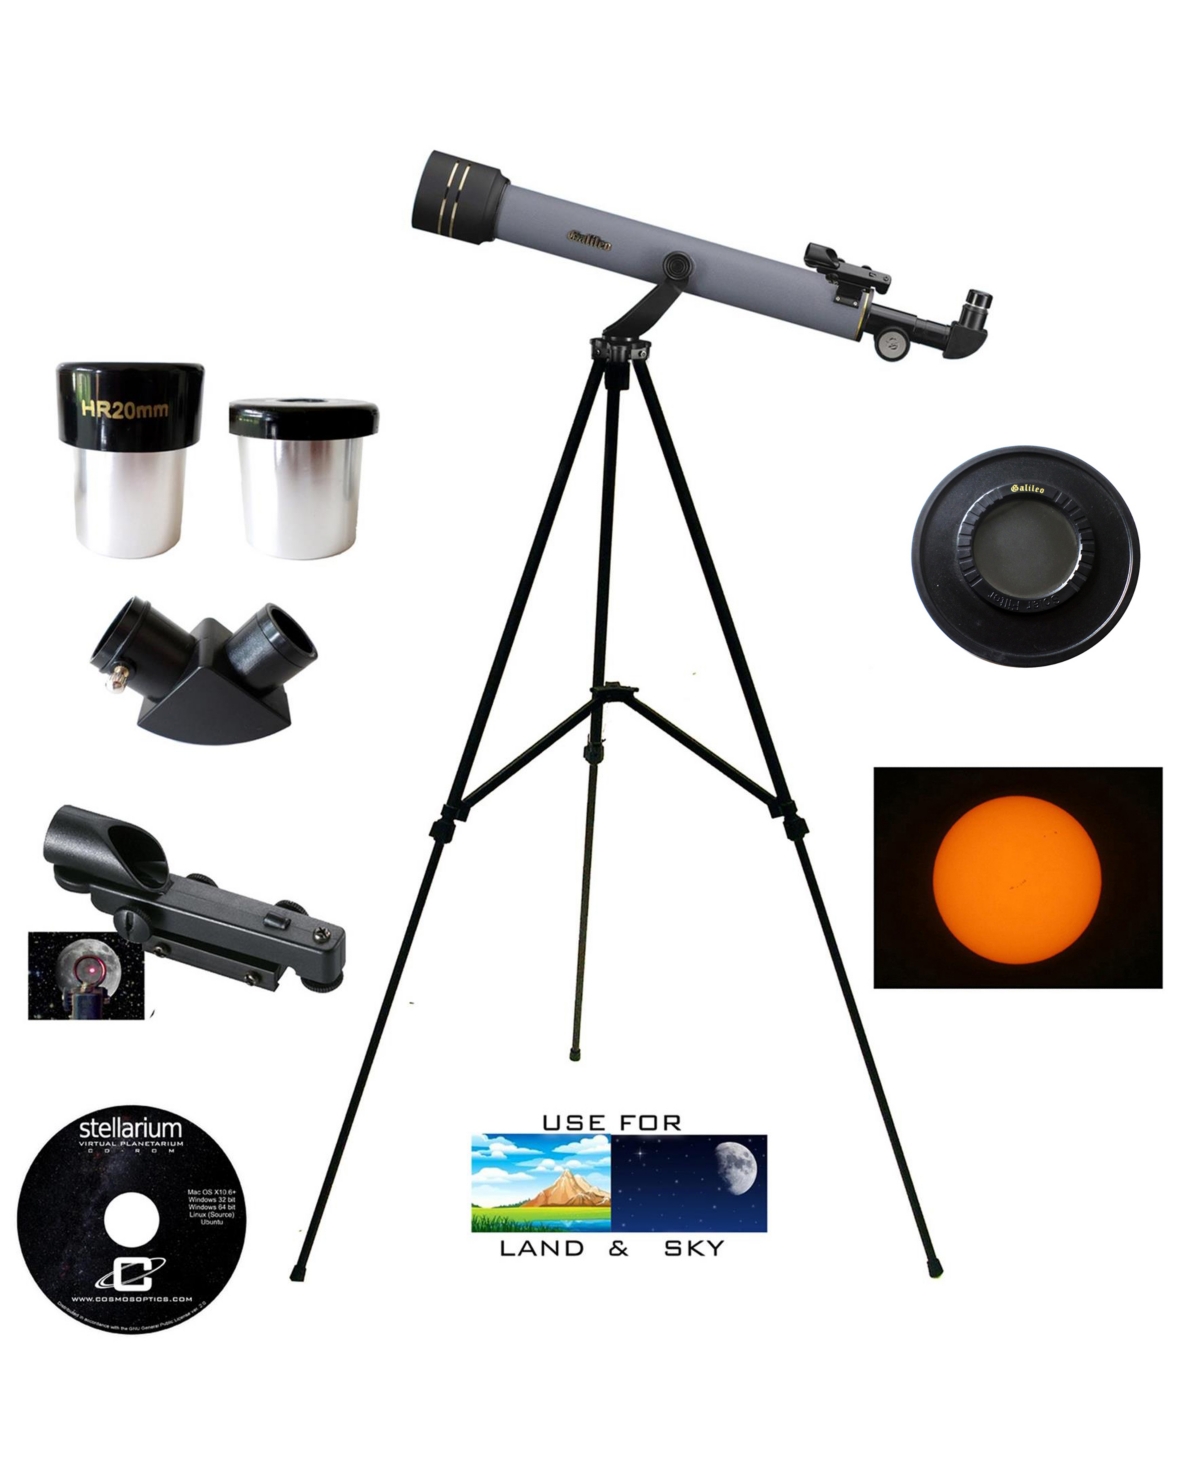 Galileo 600mm X 50mm Day And Night Refractor Telescope Kit With Solar Filter Cap In Gray